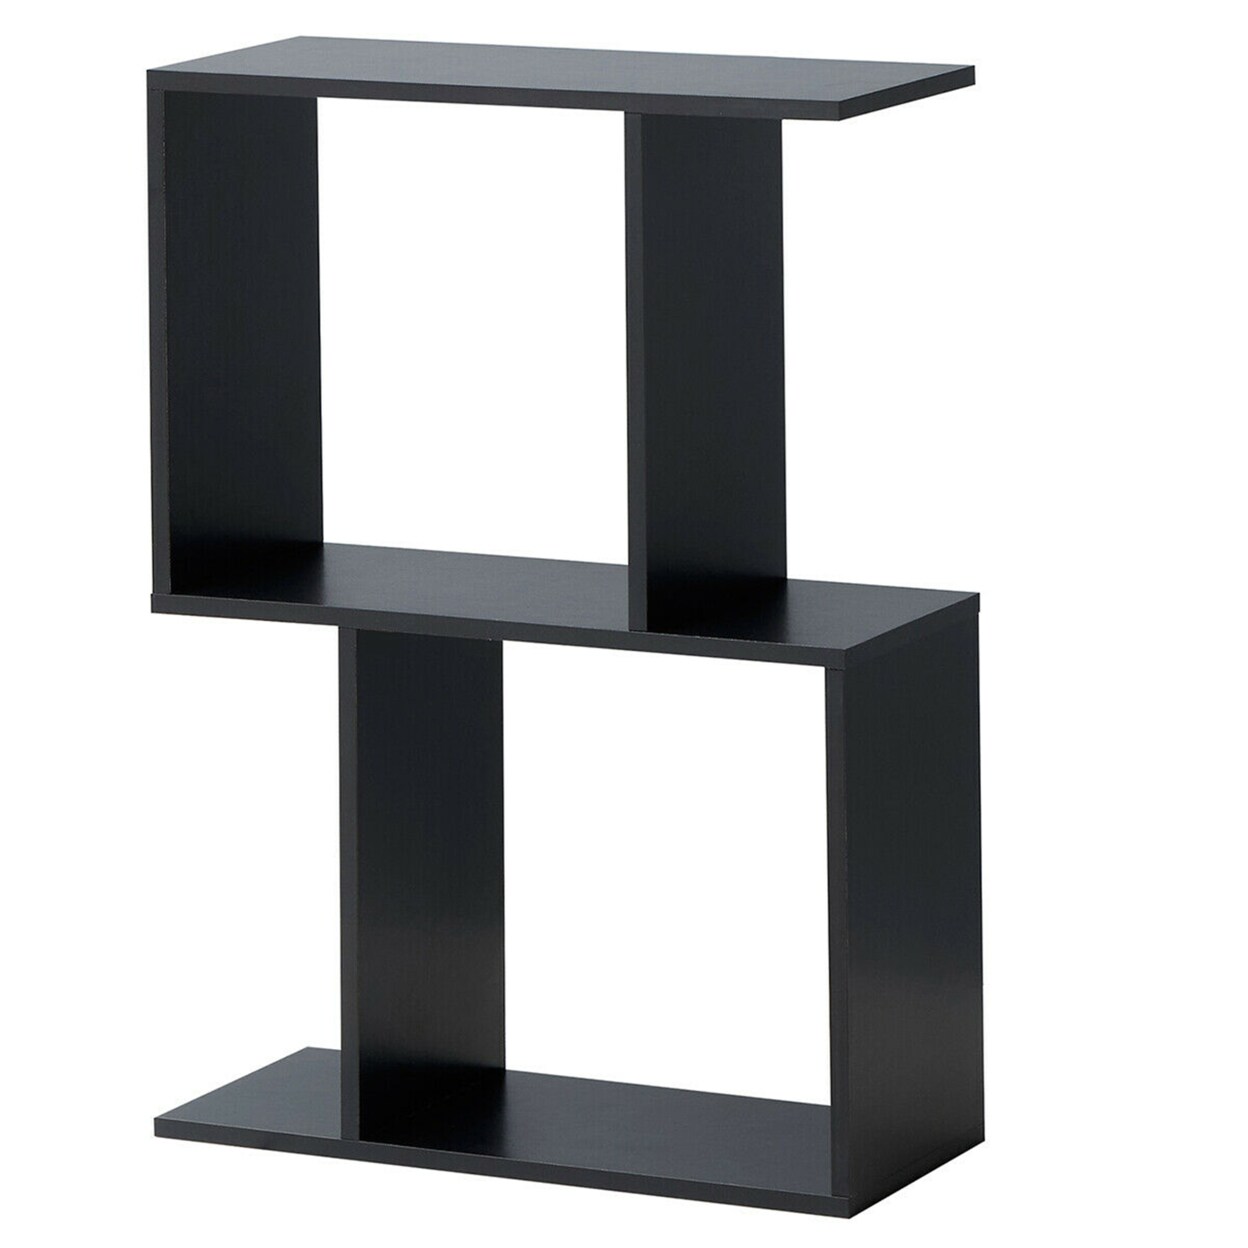 Gymax 2-tier S-Shaped Bookcase Free Standing Storage Rack Wooden Display Decor Black